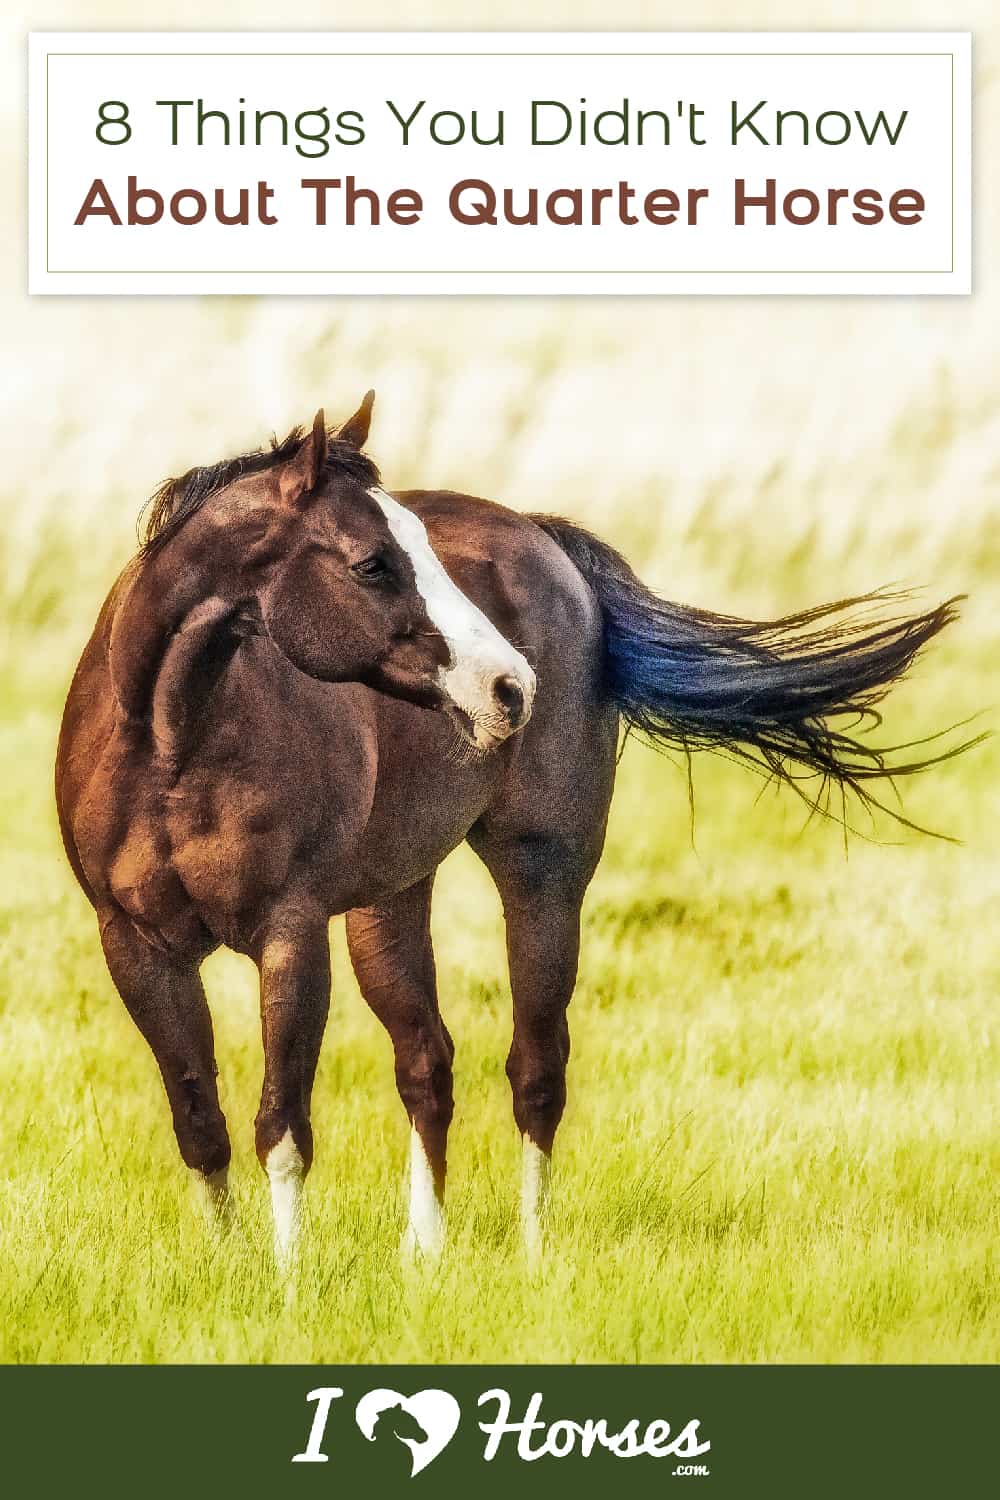 facts about the quarter horse